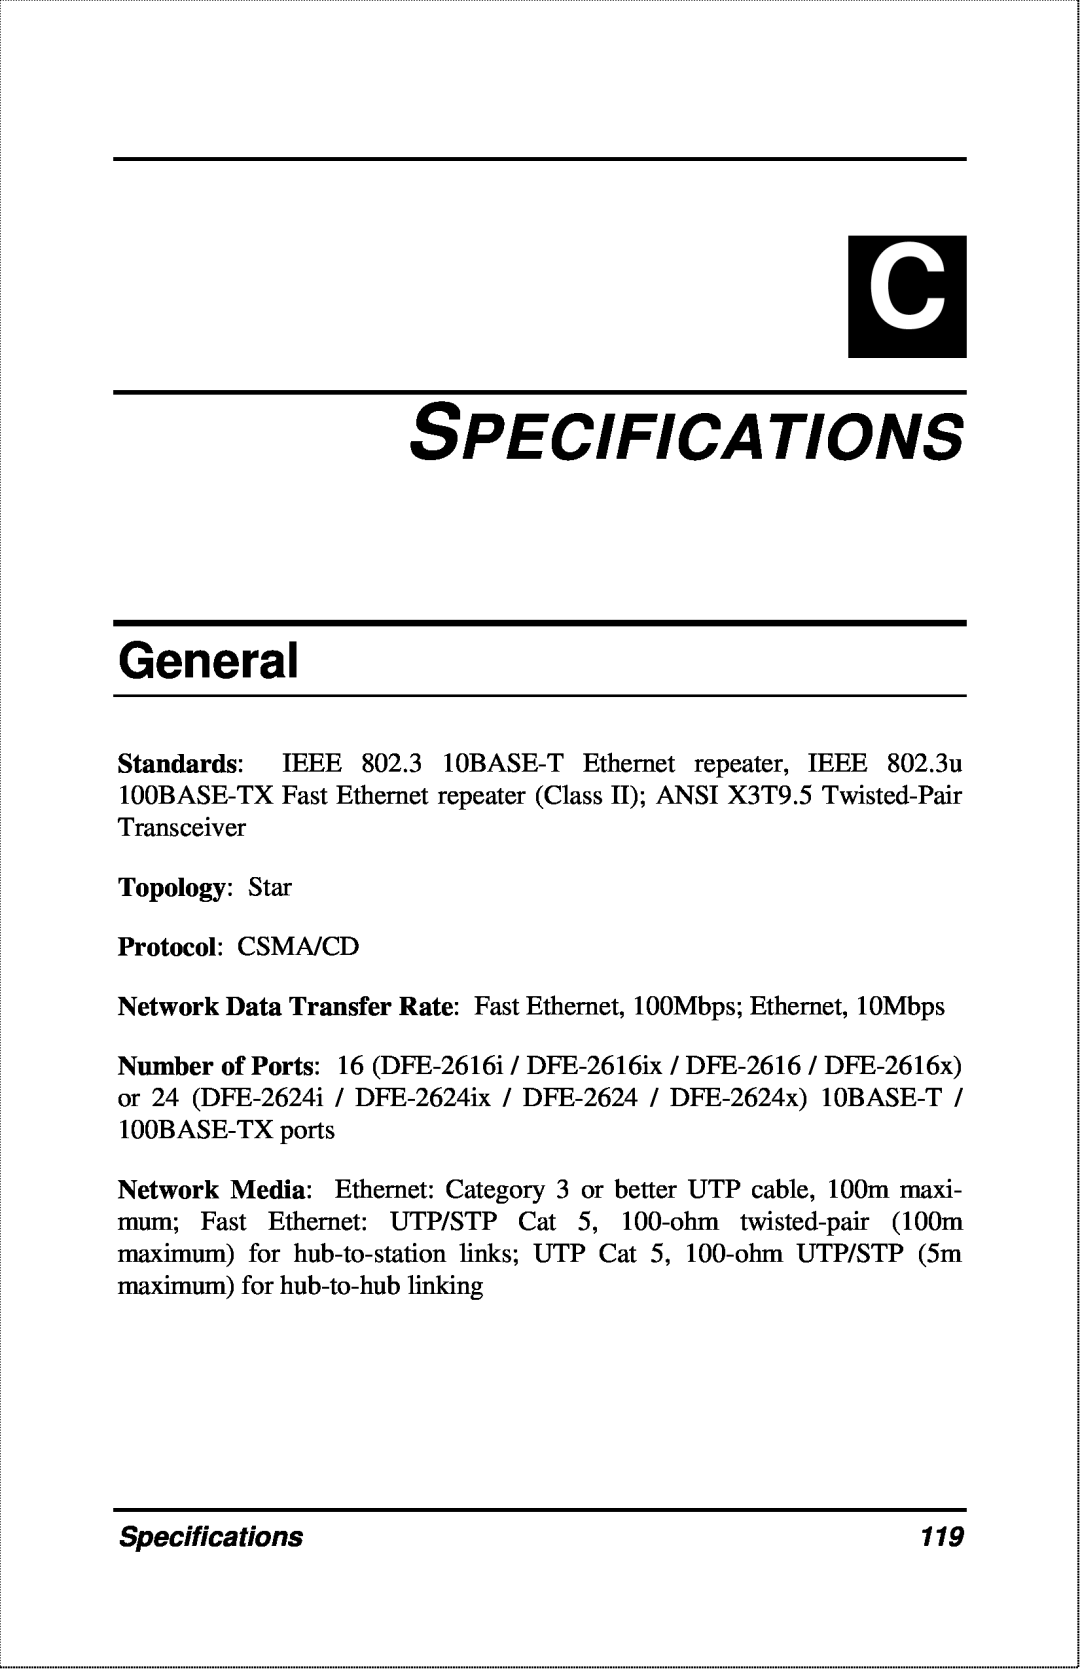 D-Link DFE-2600 manual Specifications, General, Topology Star 